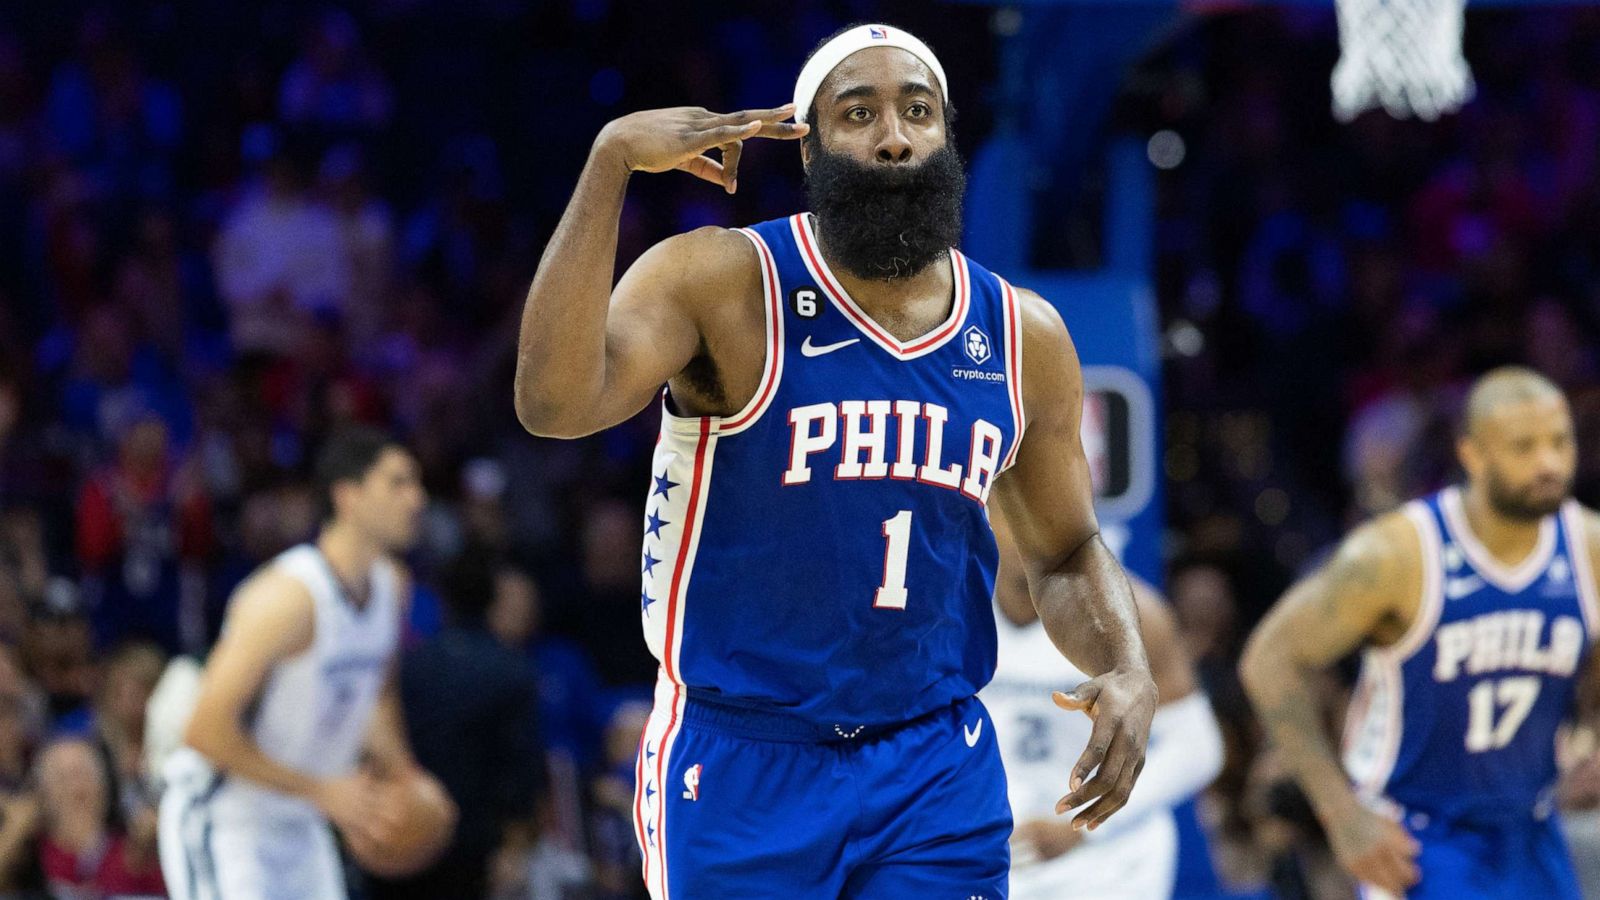 Funny photo of James Harden at 76ers practice goes viral